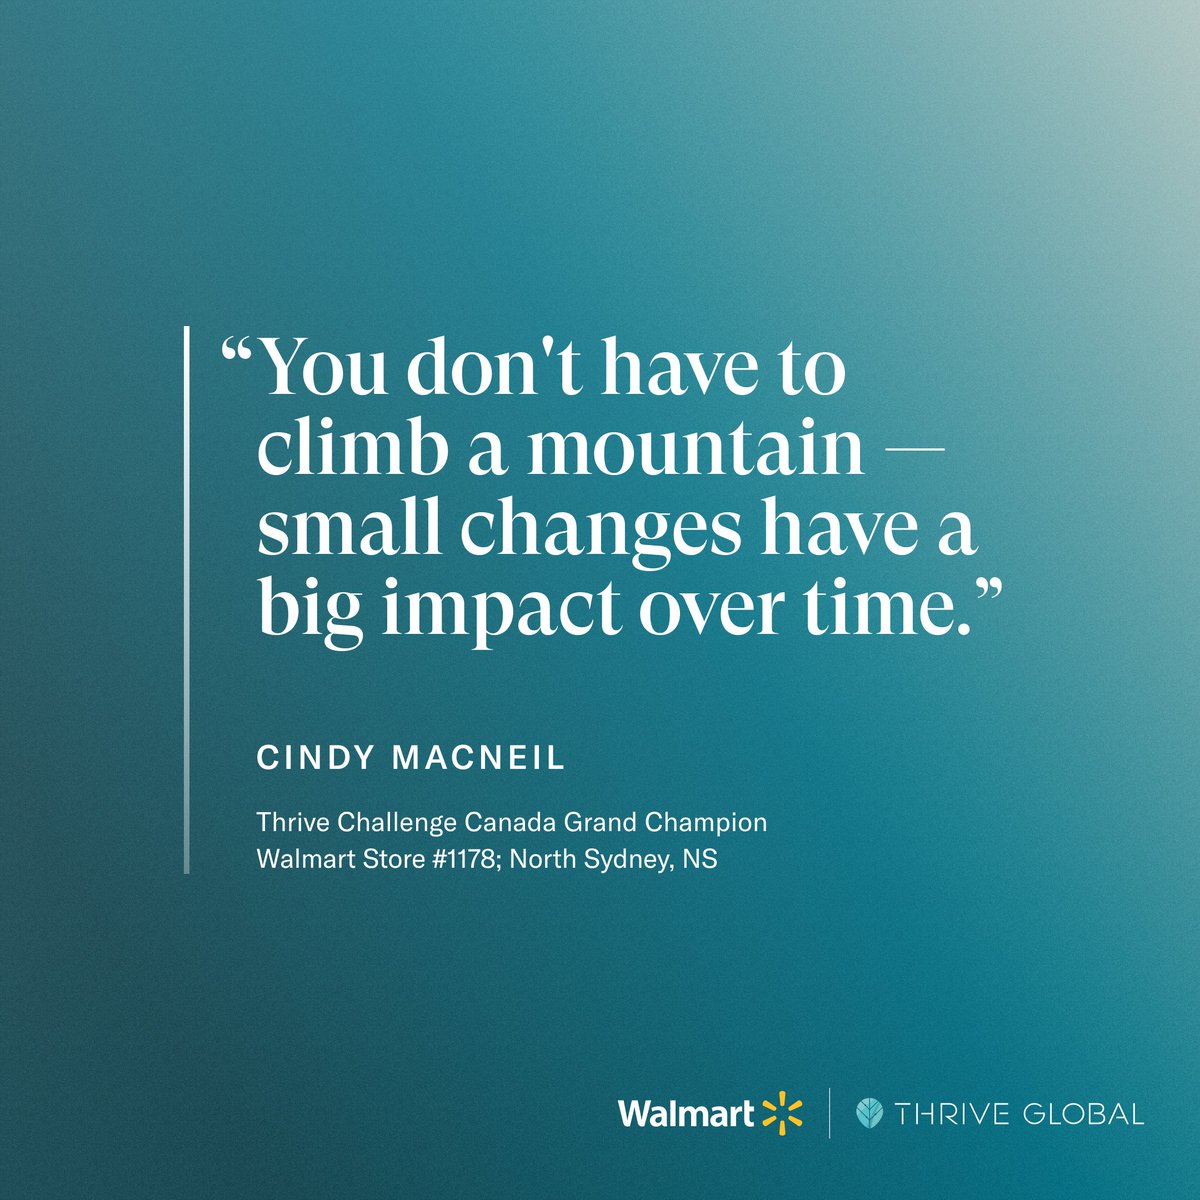 Love this story about Cindy MacNeil, a @WalmartCanada pharmacy assistant and now a @Thrive Global Challenge Grand Champion. After being diagnosed with high blood pressure, she began the #ThriveChallenge, starting with Microsteps like drinking more water, food prepping, and